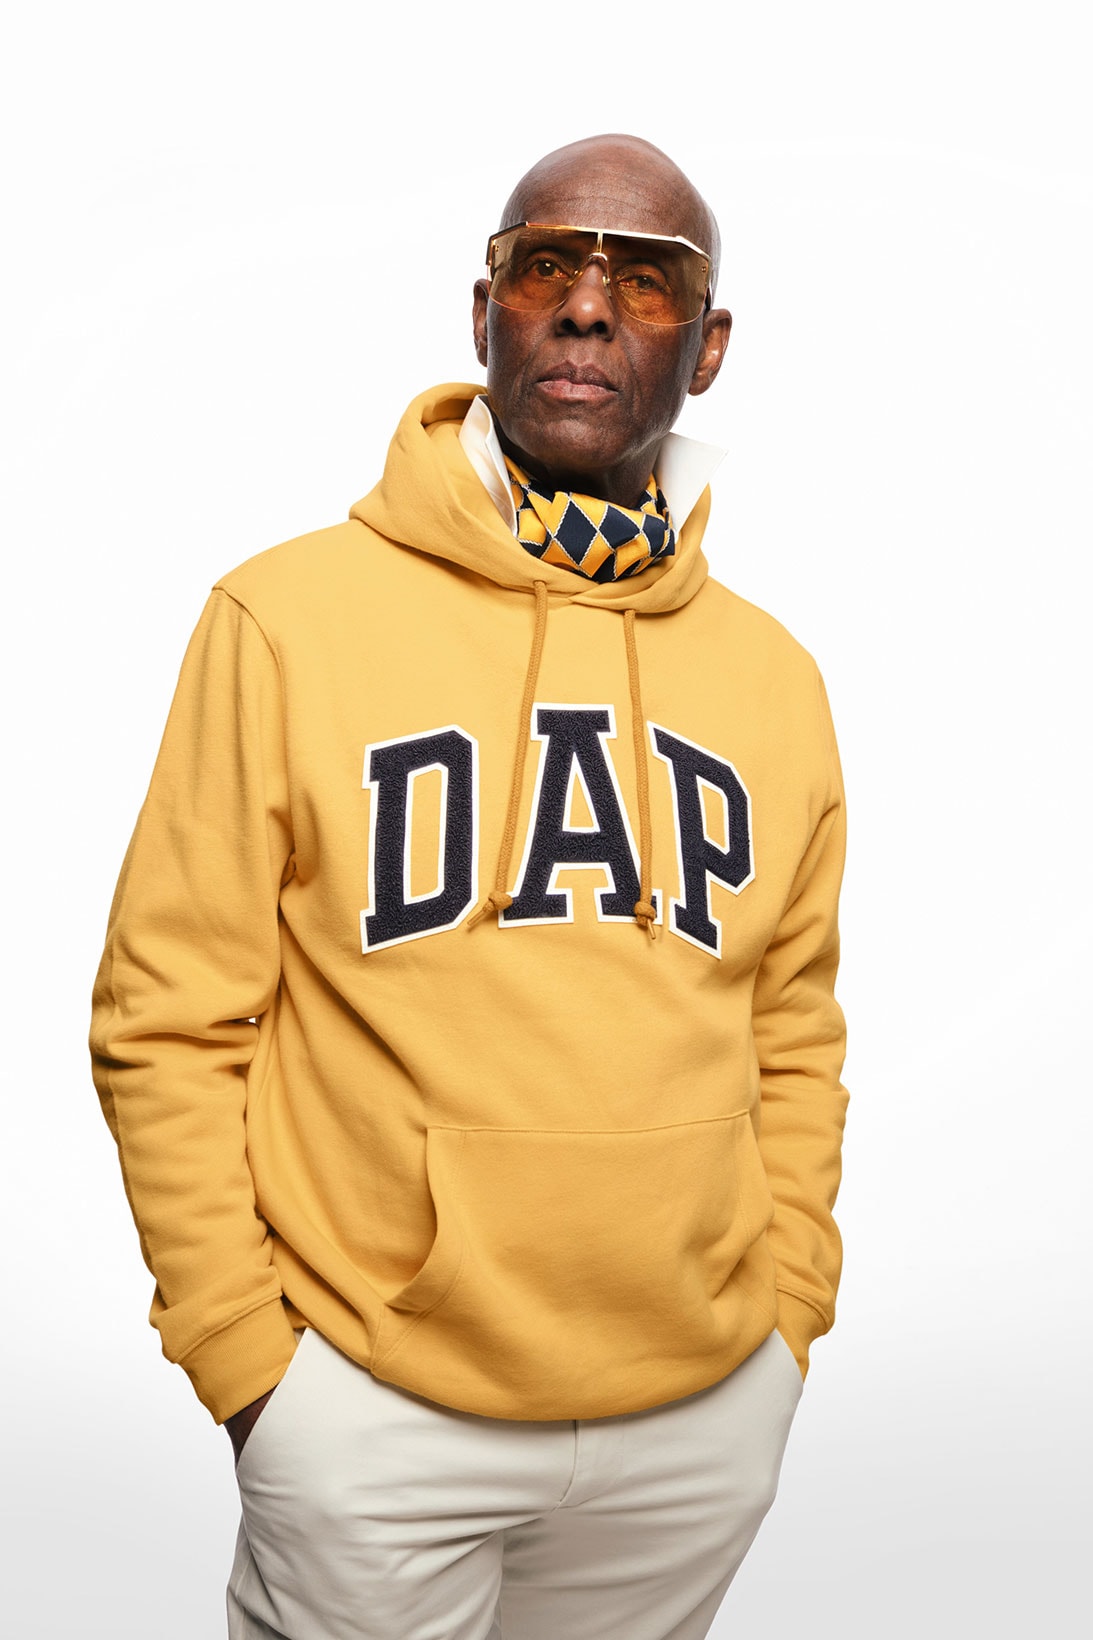 Here's How to Buy the Gap Hoodie Everyone on TikTok Is Talking About